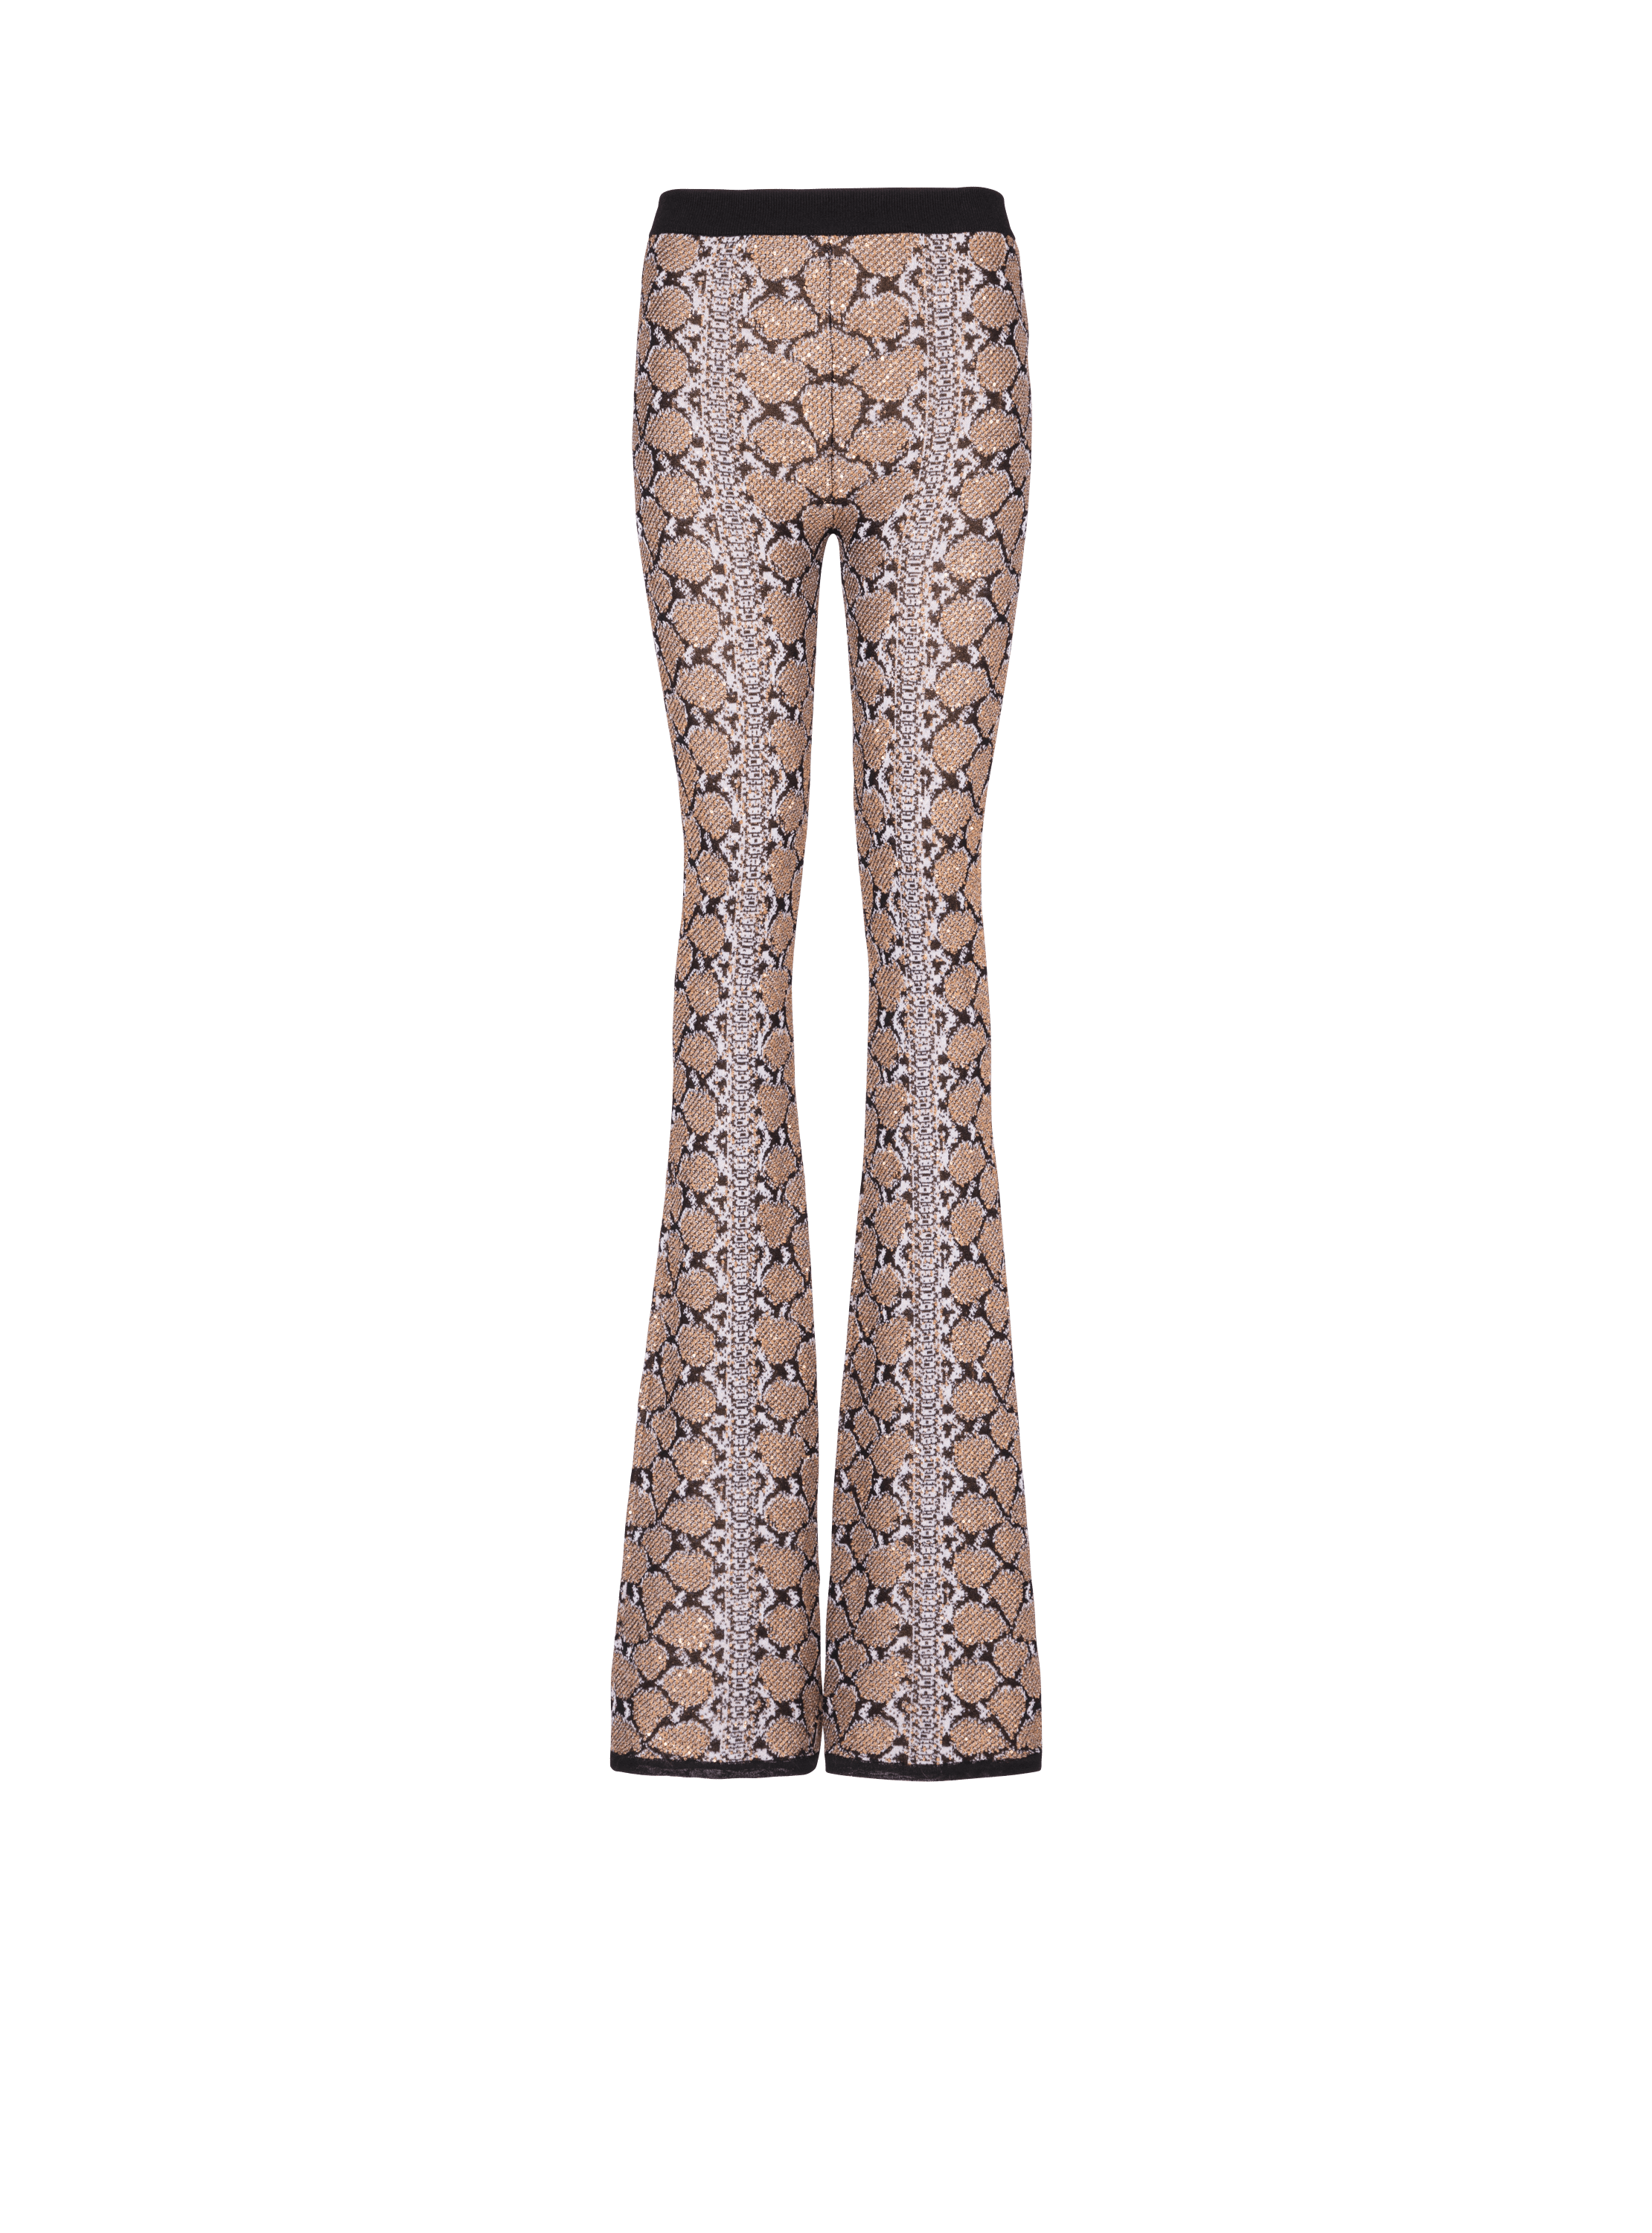 Snakeskin knit trousers, brown, hi-res